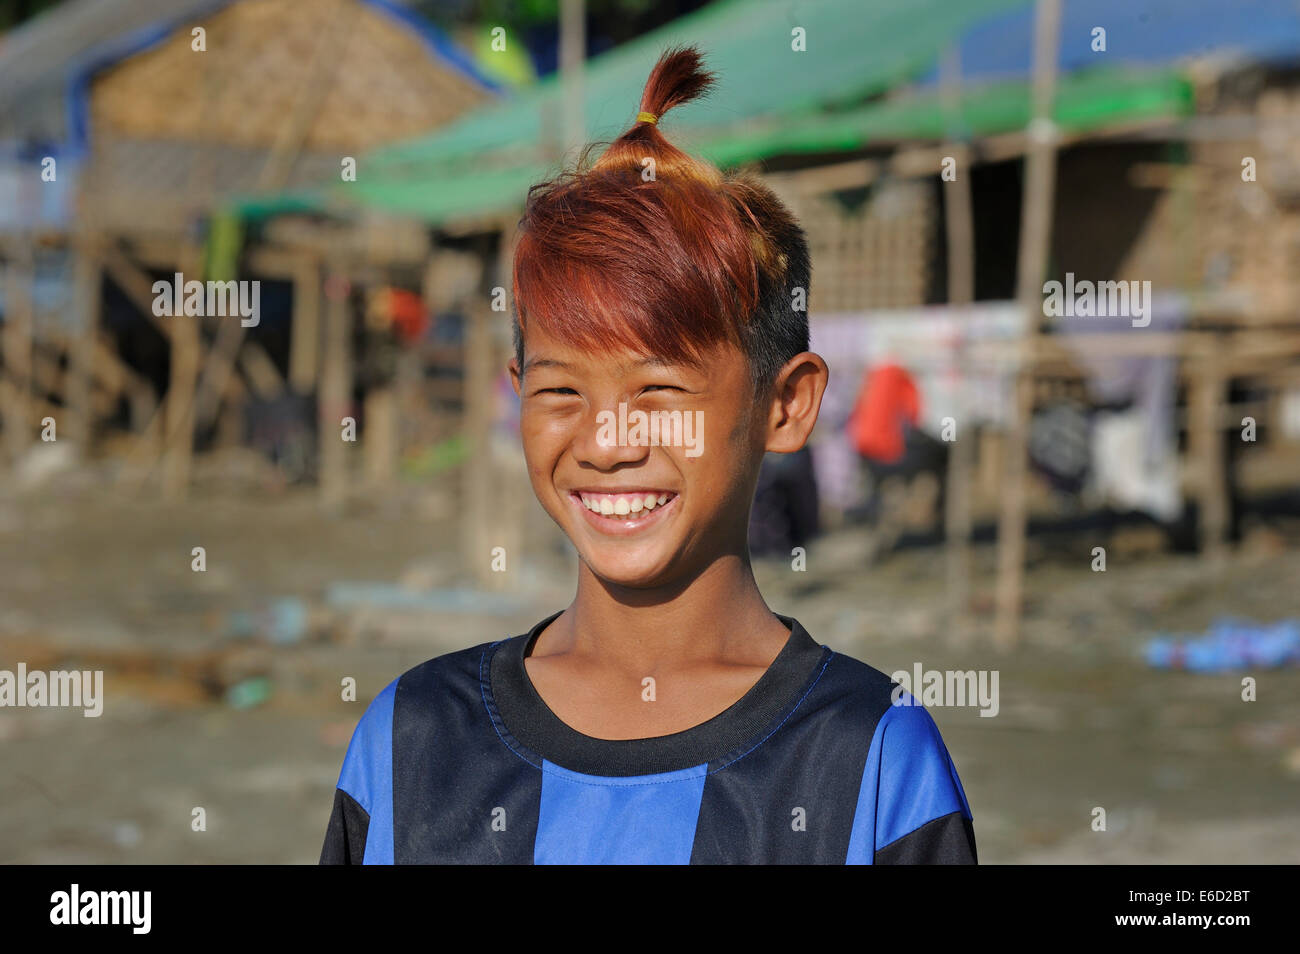 Boy from the slums with dyed hair and fashionable hairstyle, Irrawaddy, Mandalay, Mandalay District, Myanmar Stock Photo